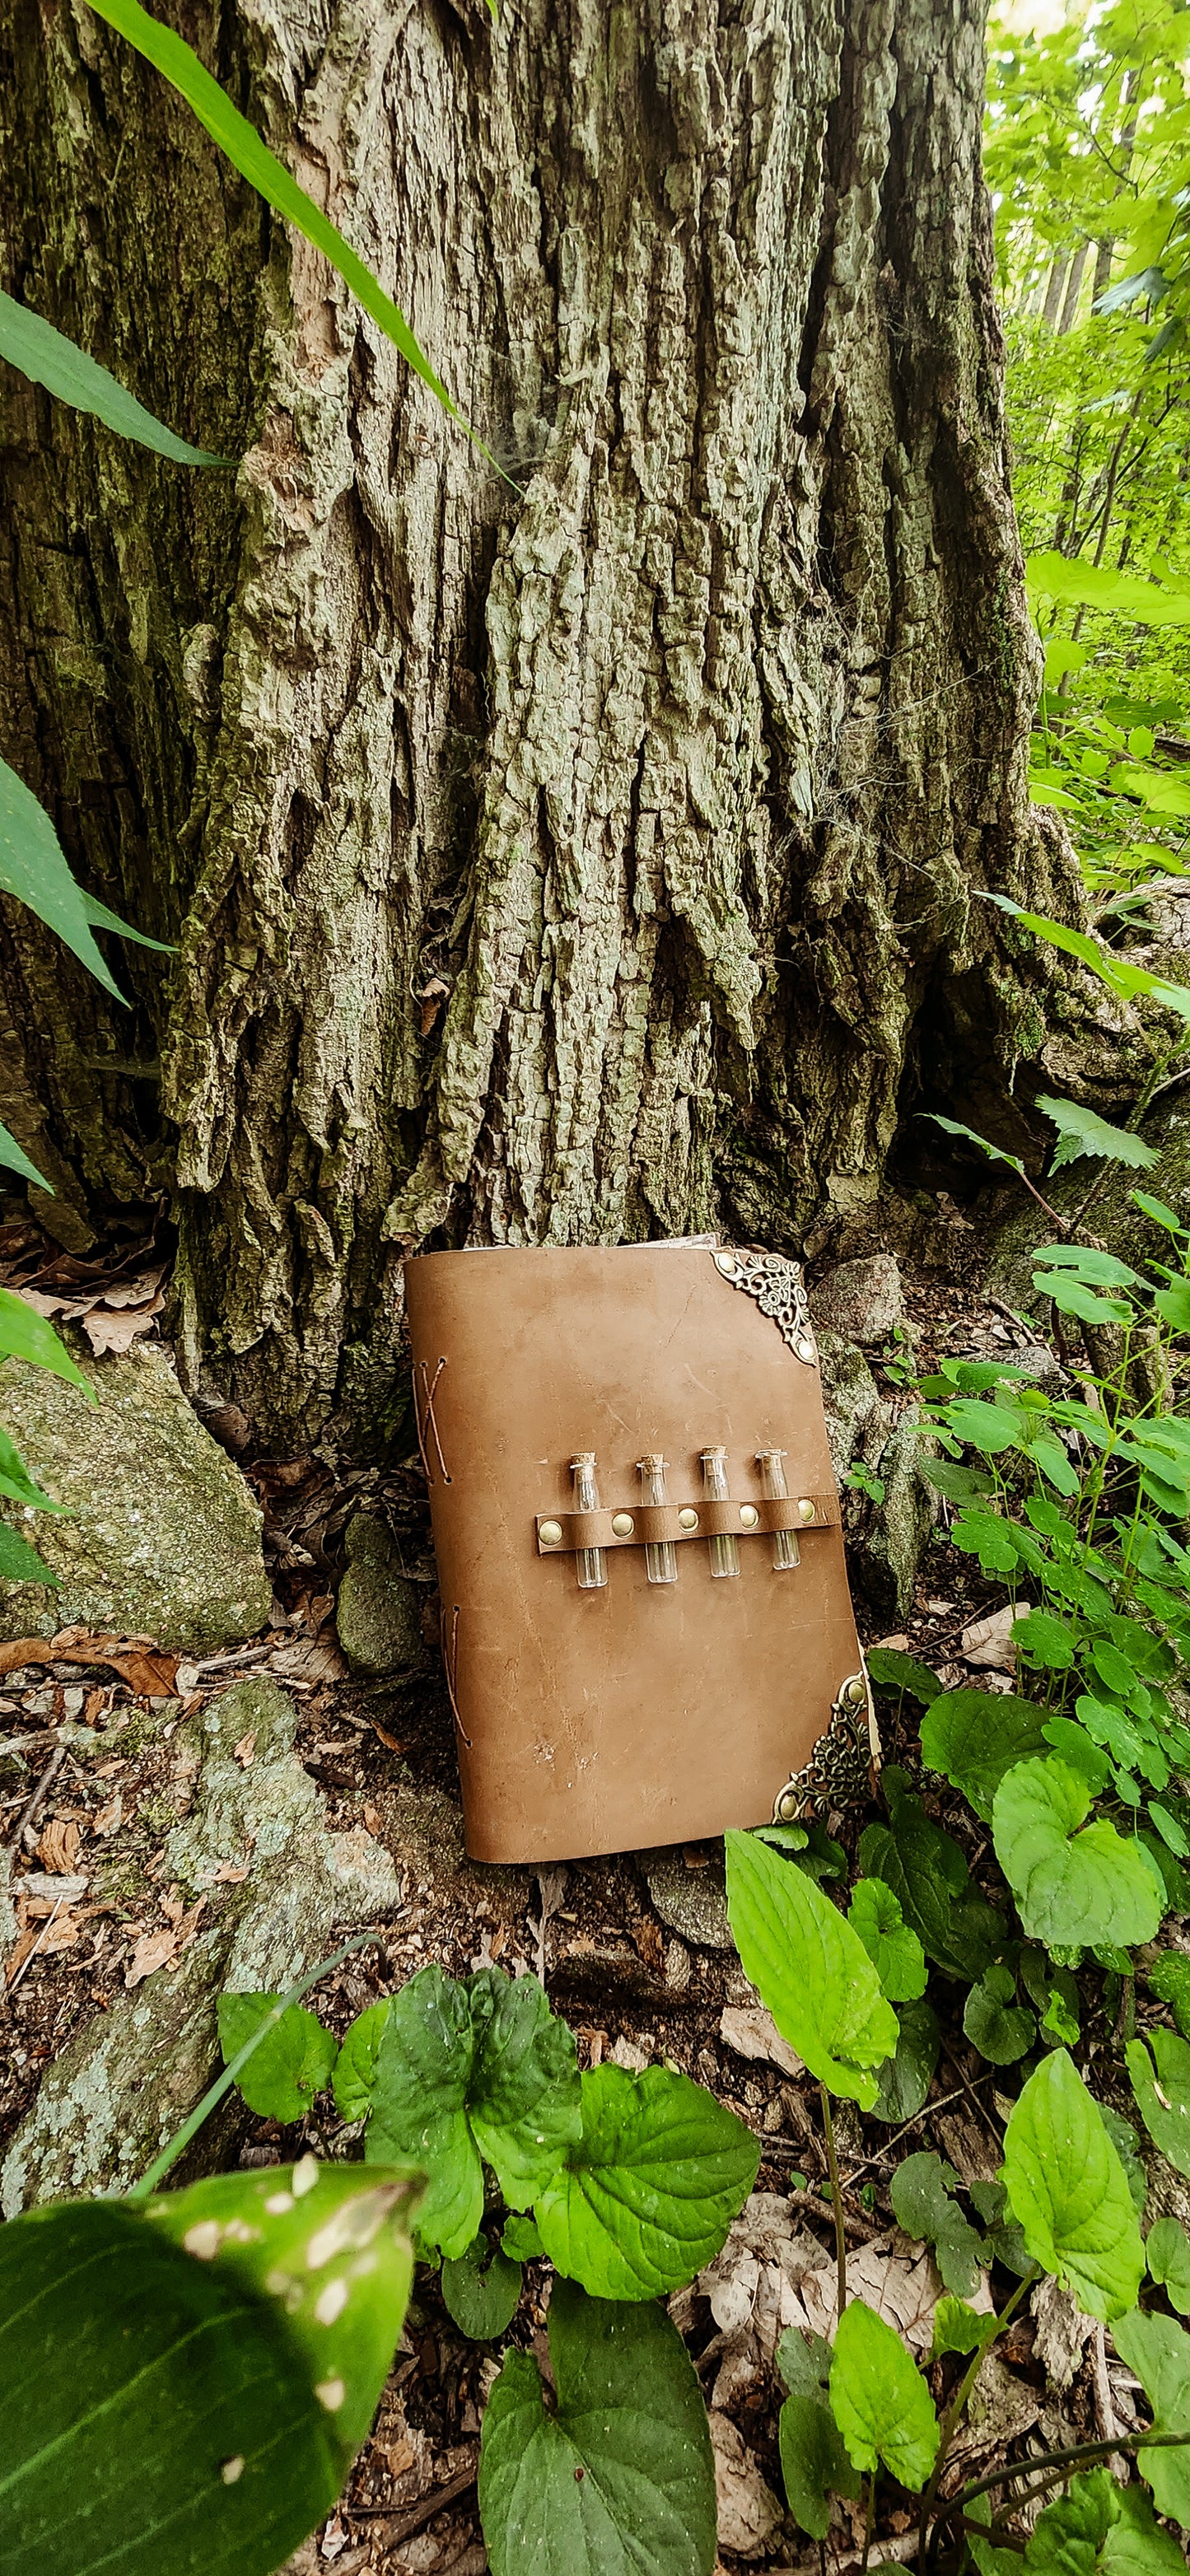 The Alchemy Grimoire leather Journal & sketchbook